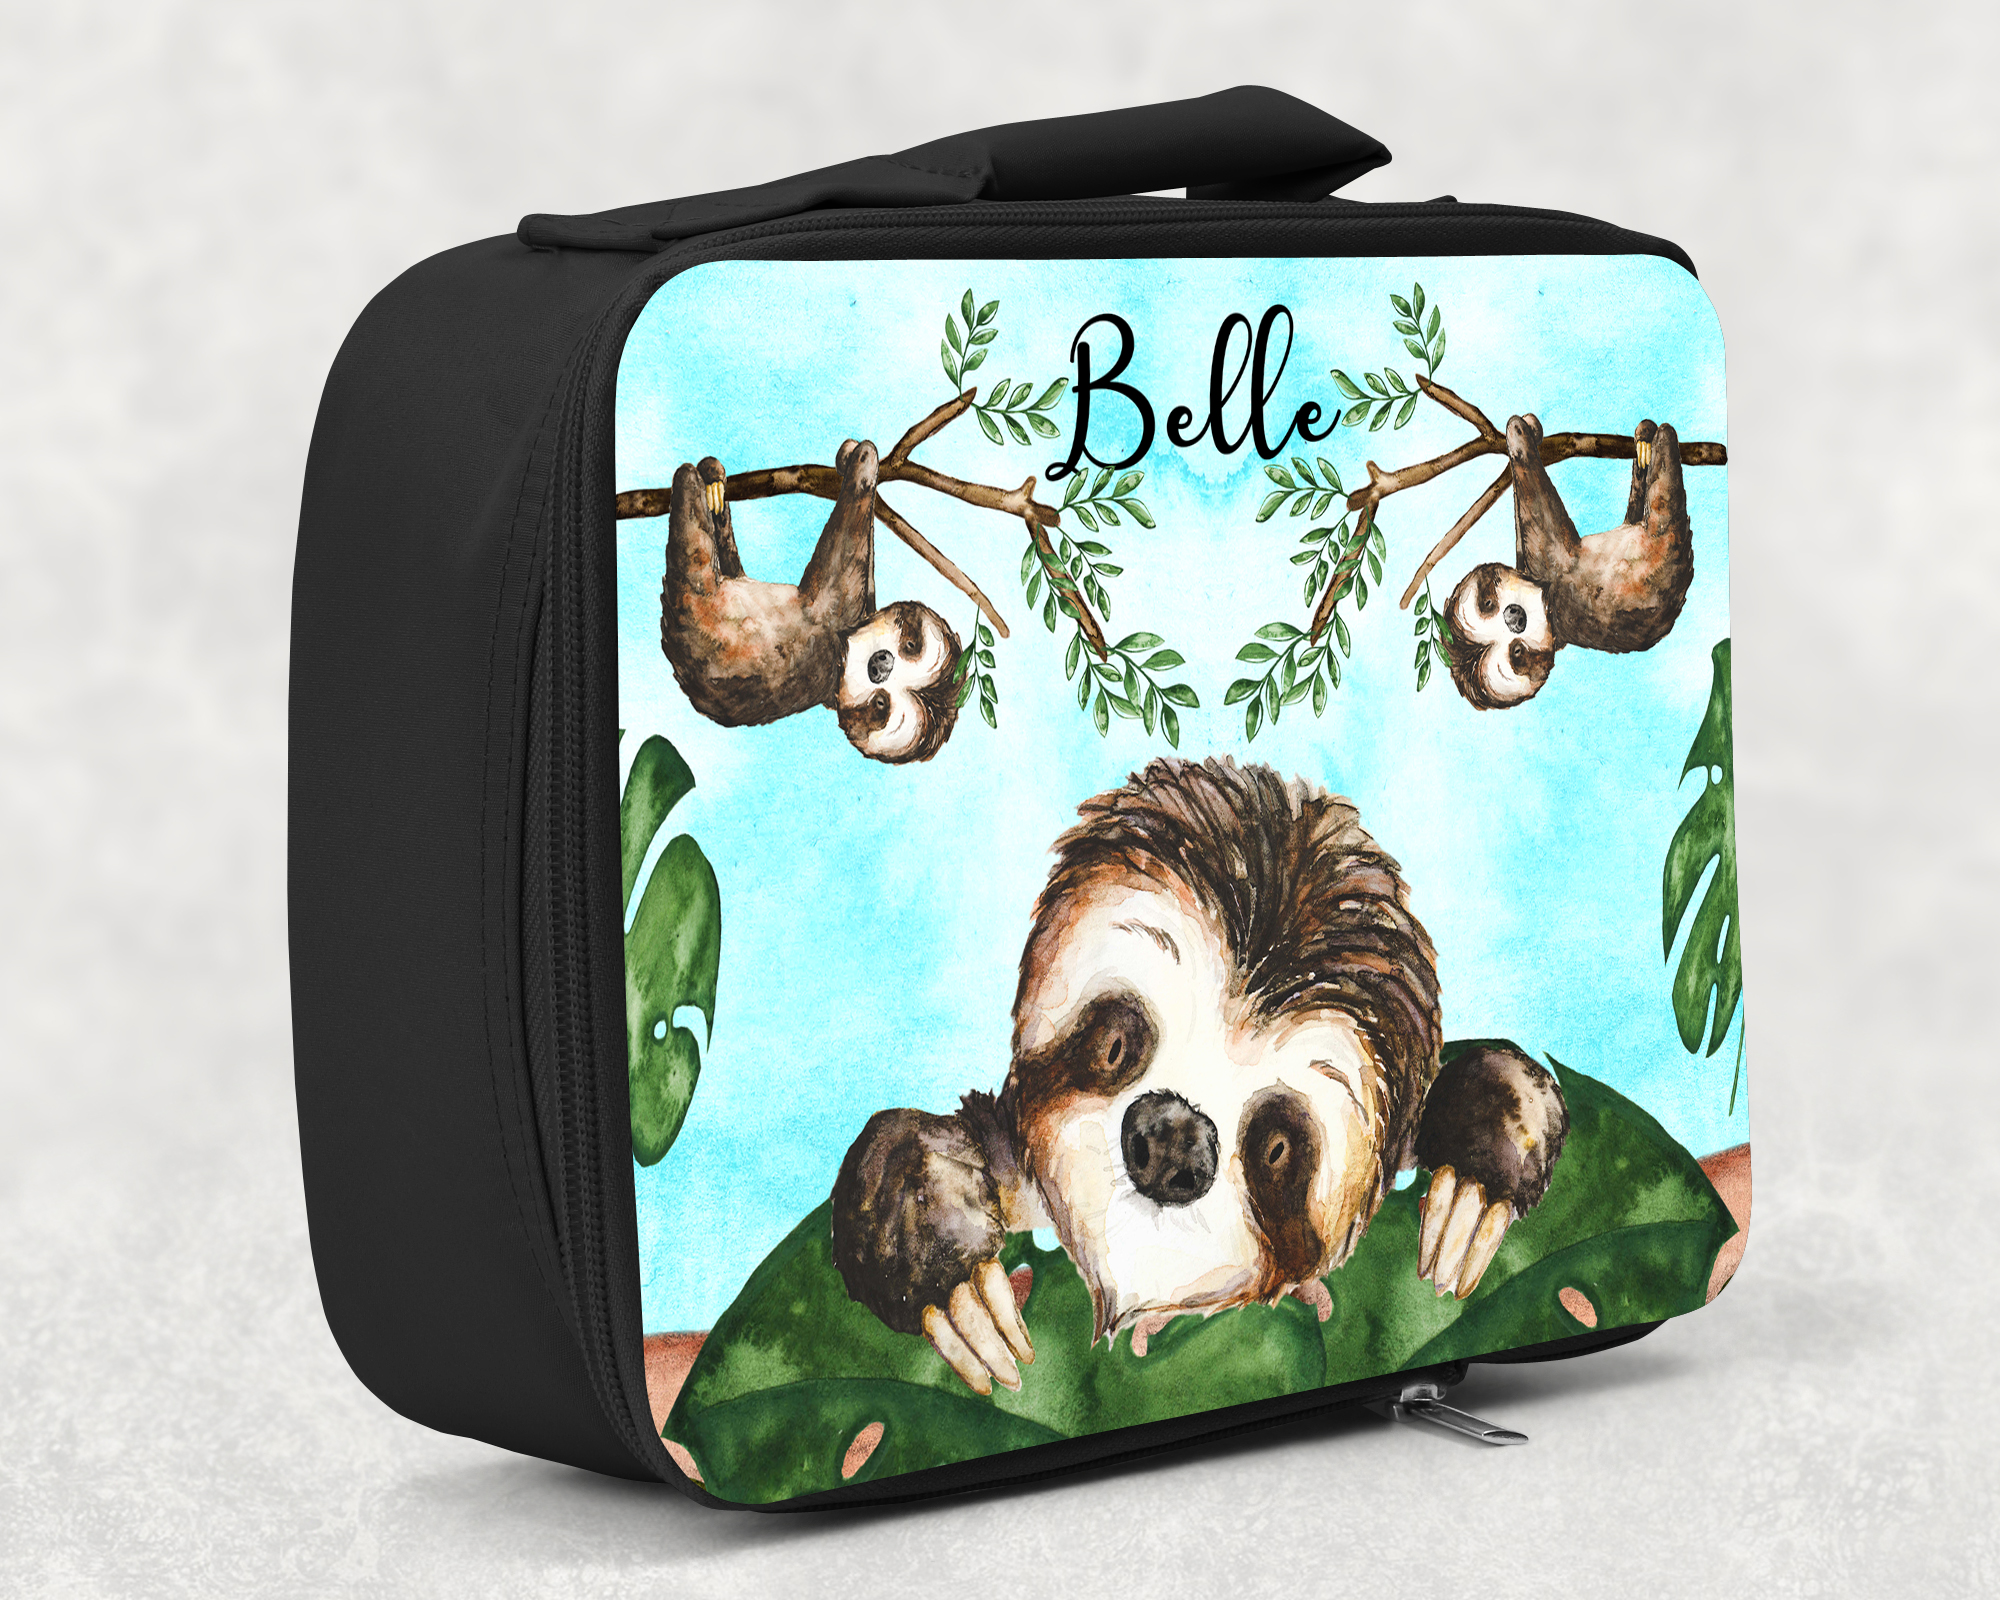 children's insulated lunch bag with bright colourful personalised printed design in sloth theme